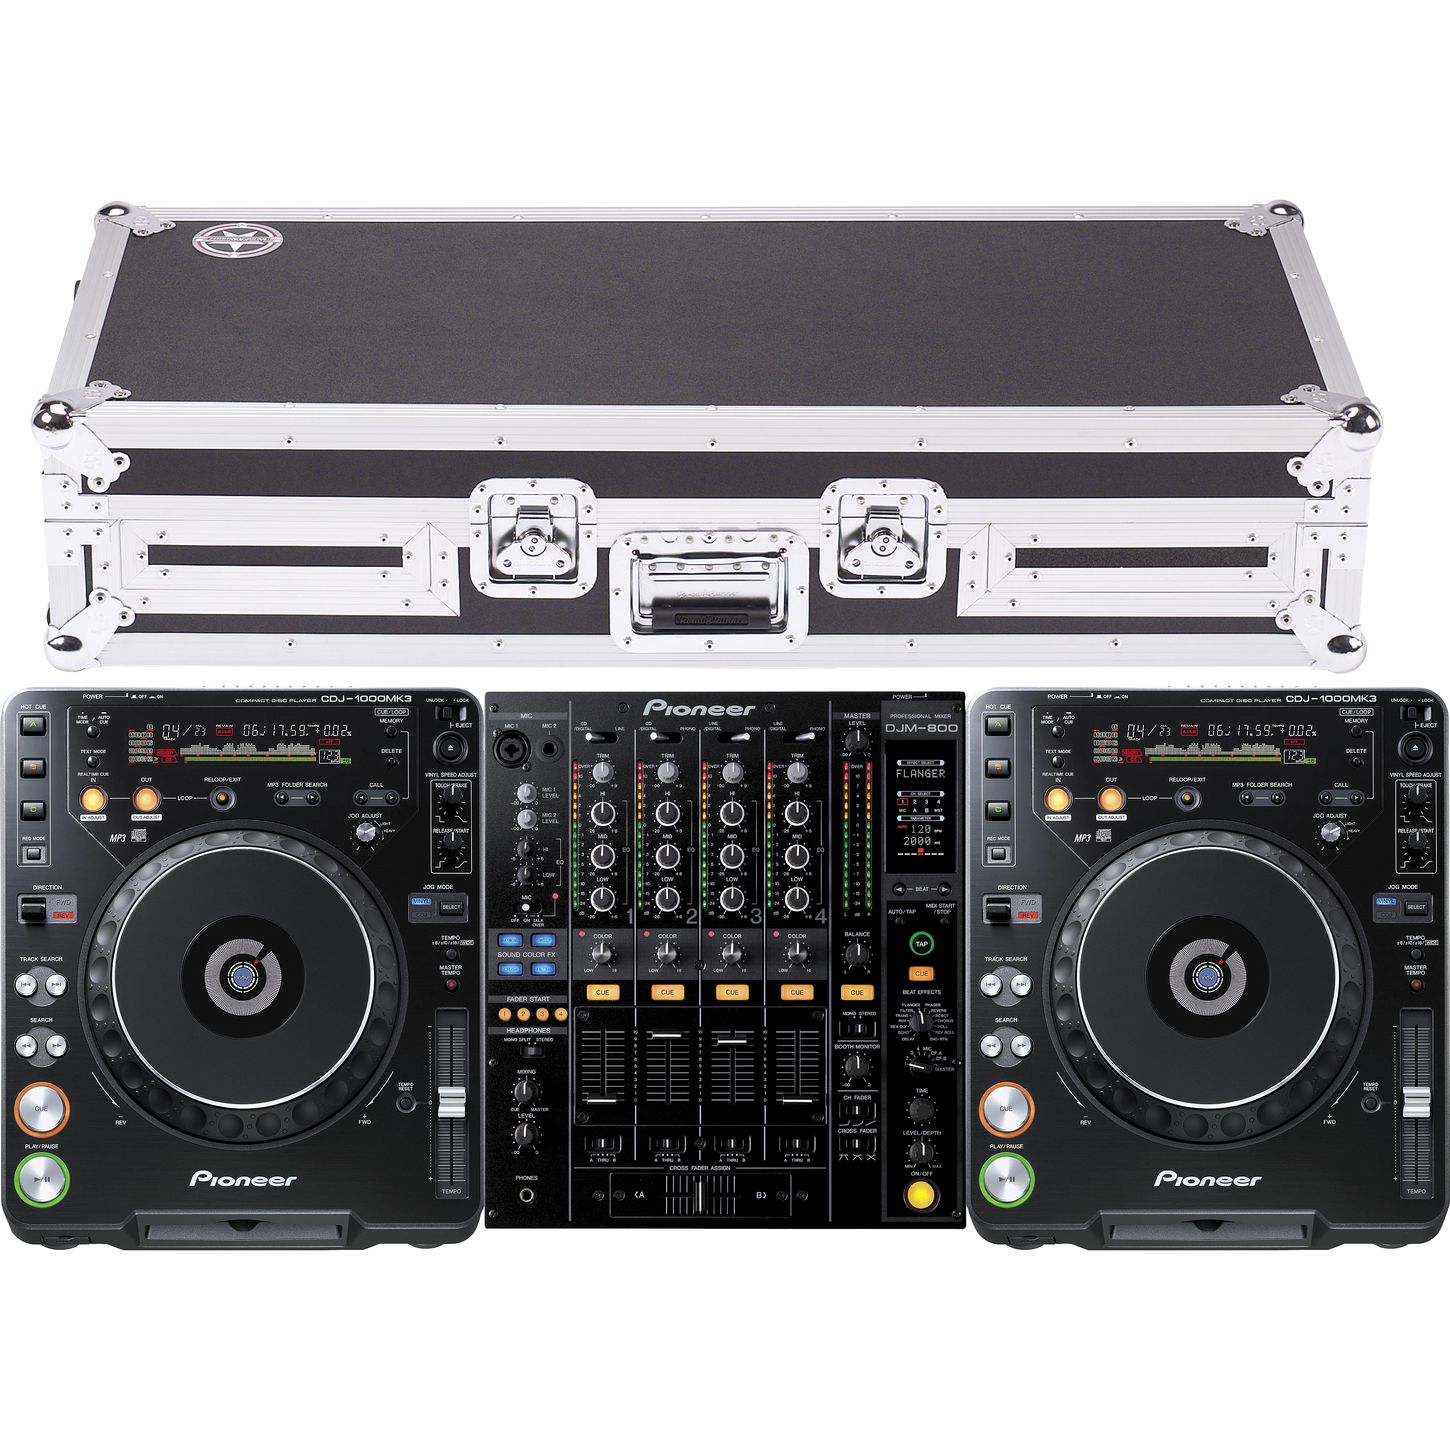 2x Pioneer 1000MK3 1x Pioneer 800 Mixer Only On 2 20 000  large image 0